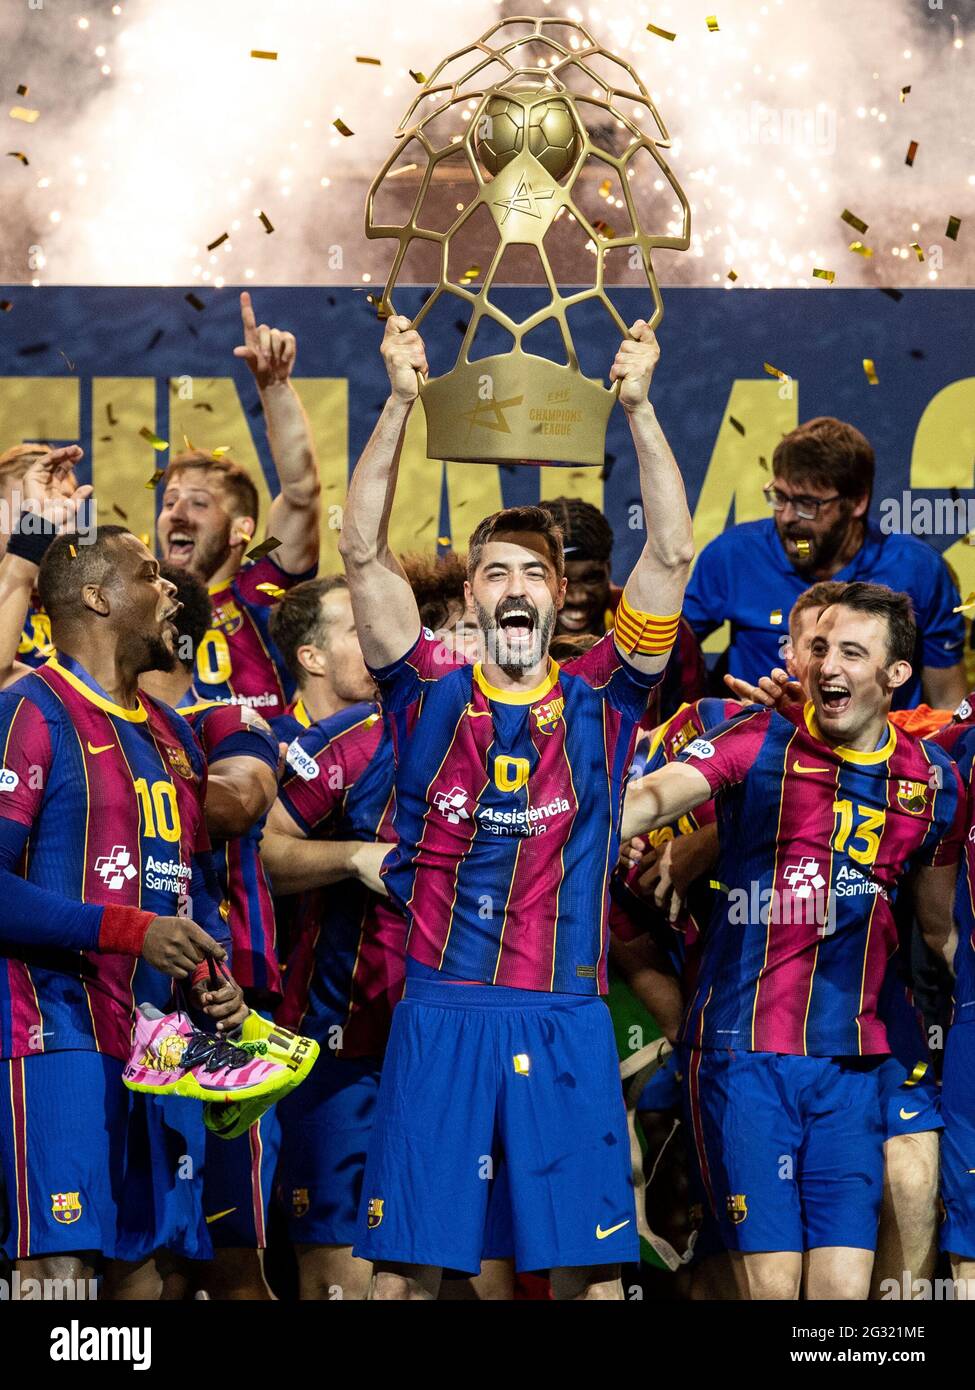 Cologne, Germany. 13th June, 2021. Handball: Champions League, FC Barcelona  - Aalborg HB, Final Round, Final Four, Final at the Lanxess Arena.  Barcelona's Raul Entrerrios raises the trophy as he celebrates with